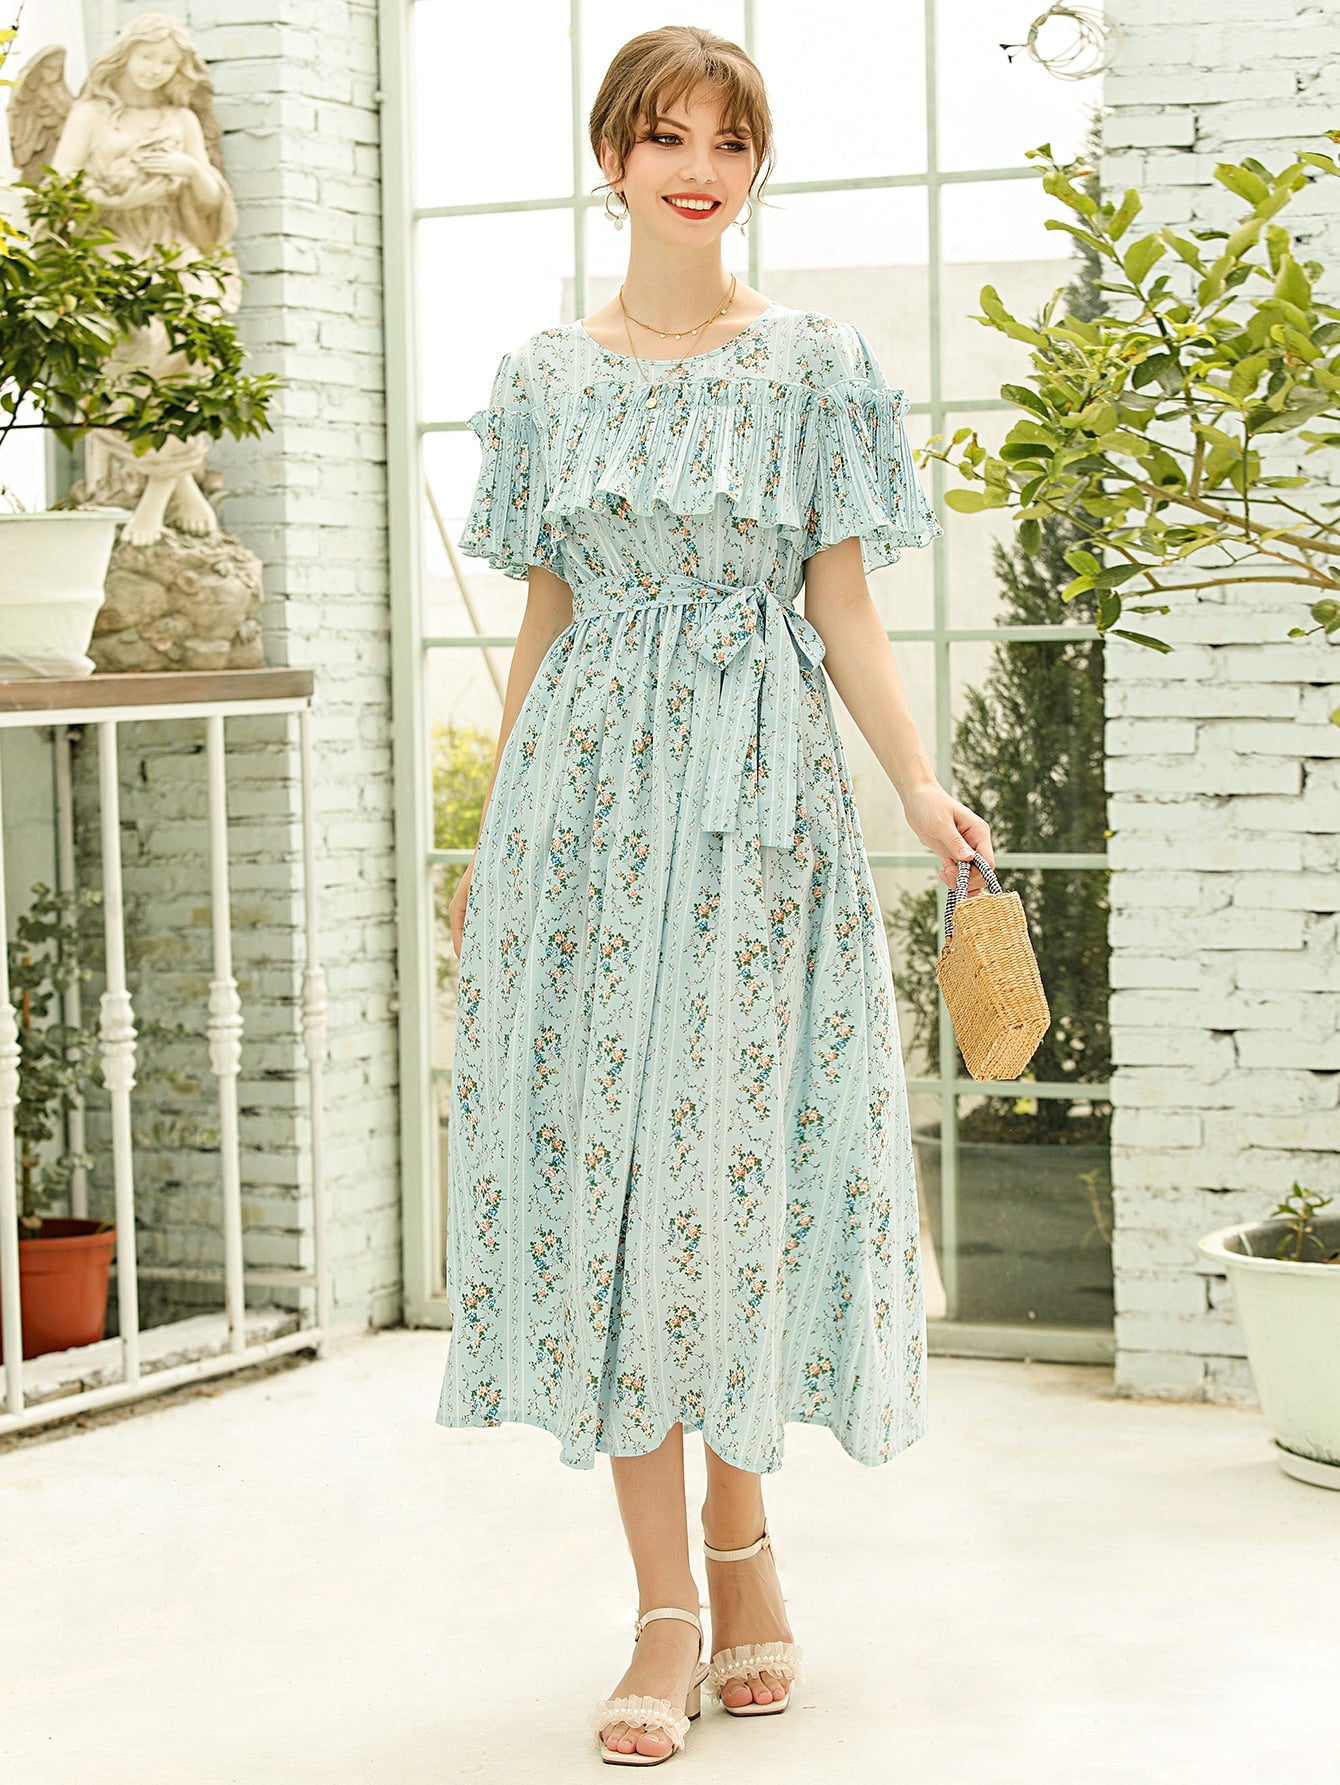 Plicated Ruffle Self Tie Ditsy Floral Dress